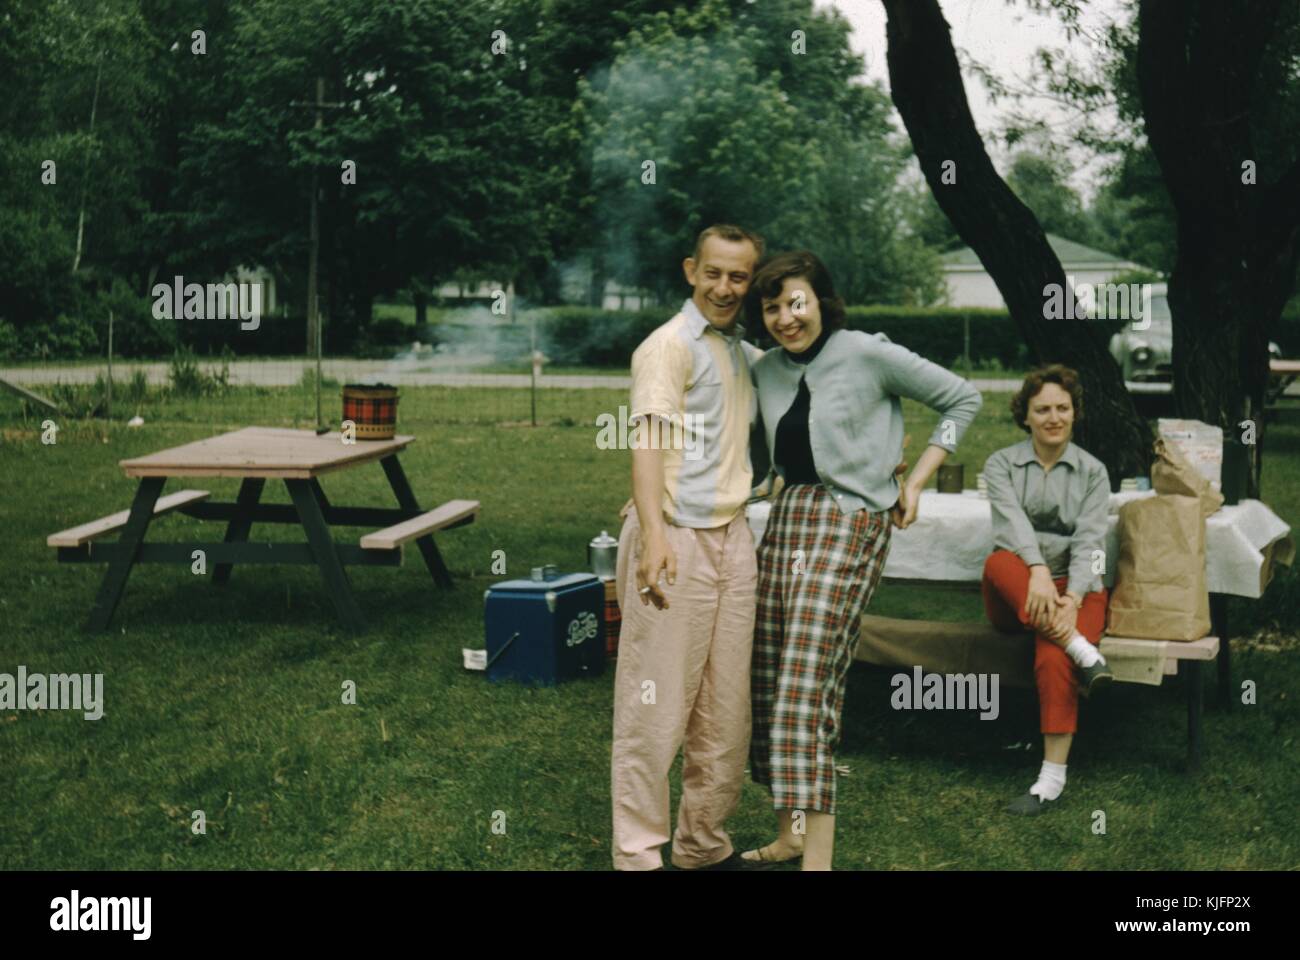 Couple posing for a picture at a park, man is smoking a cigarette, behind them a woman sitting at a picnic table covered with a table cloth, a cooler, and what appear to be bags of groceries, the people all seem to be in 1950s attire, 1952. Stock Photo